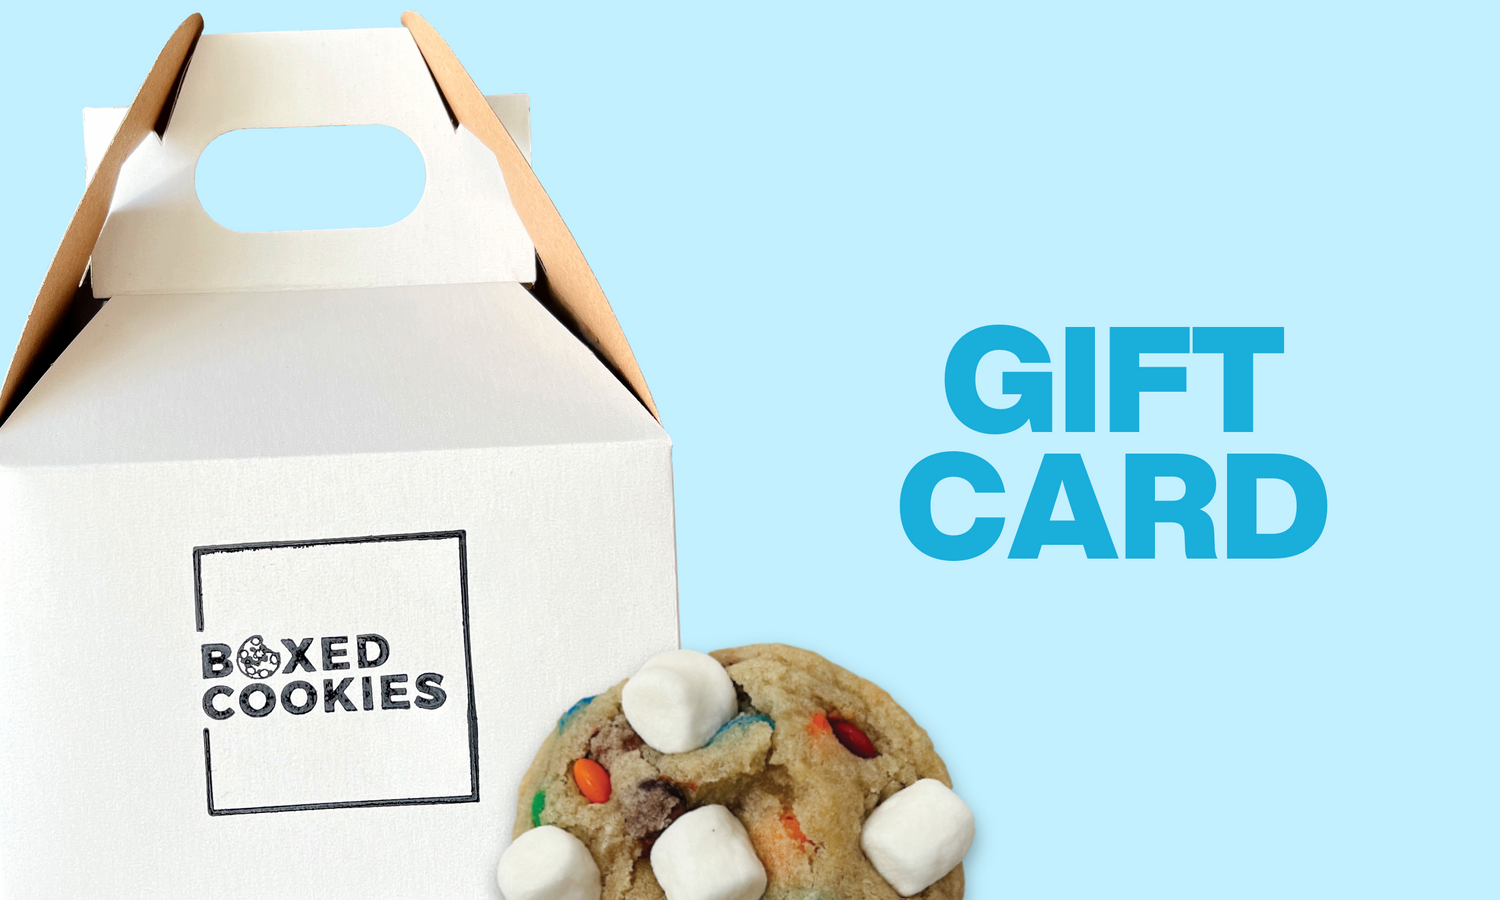 BOXED COOKIES Gift Card